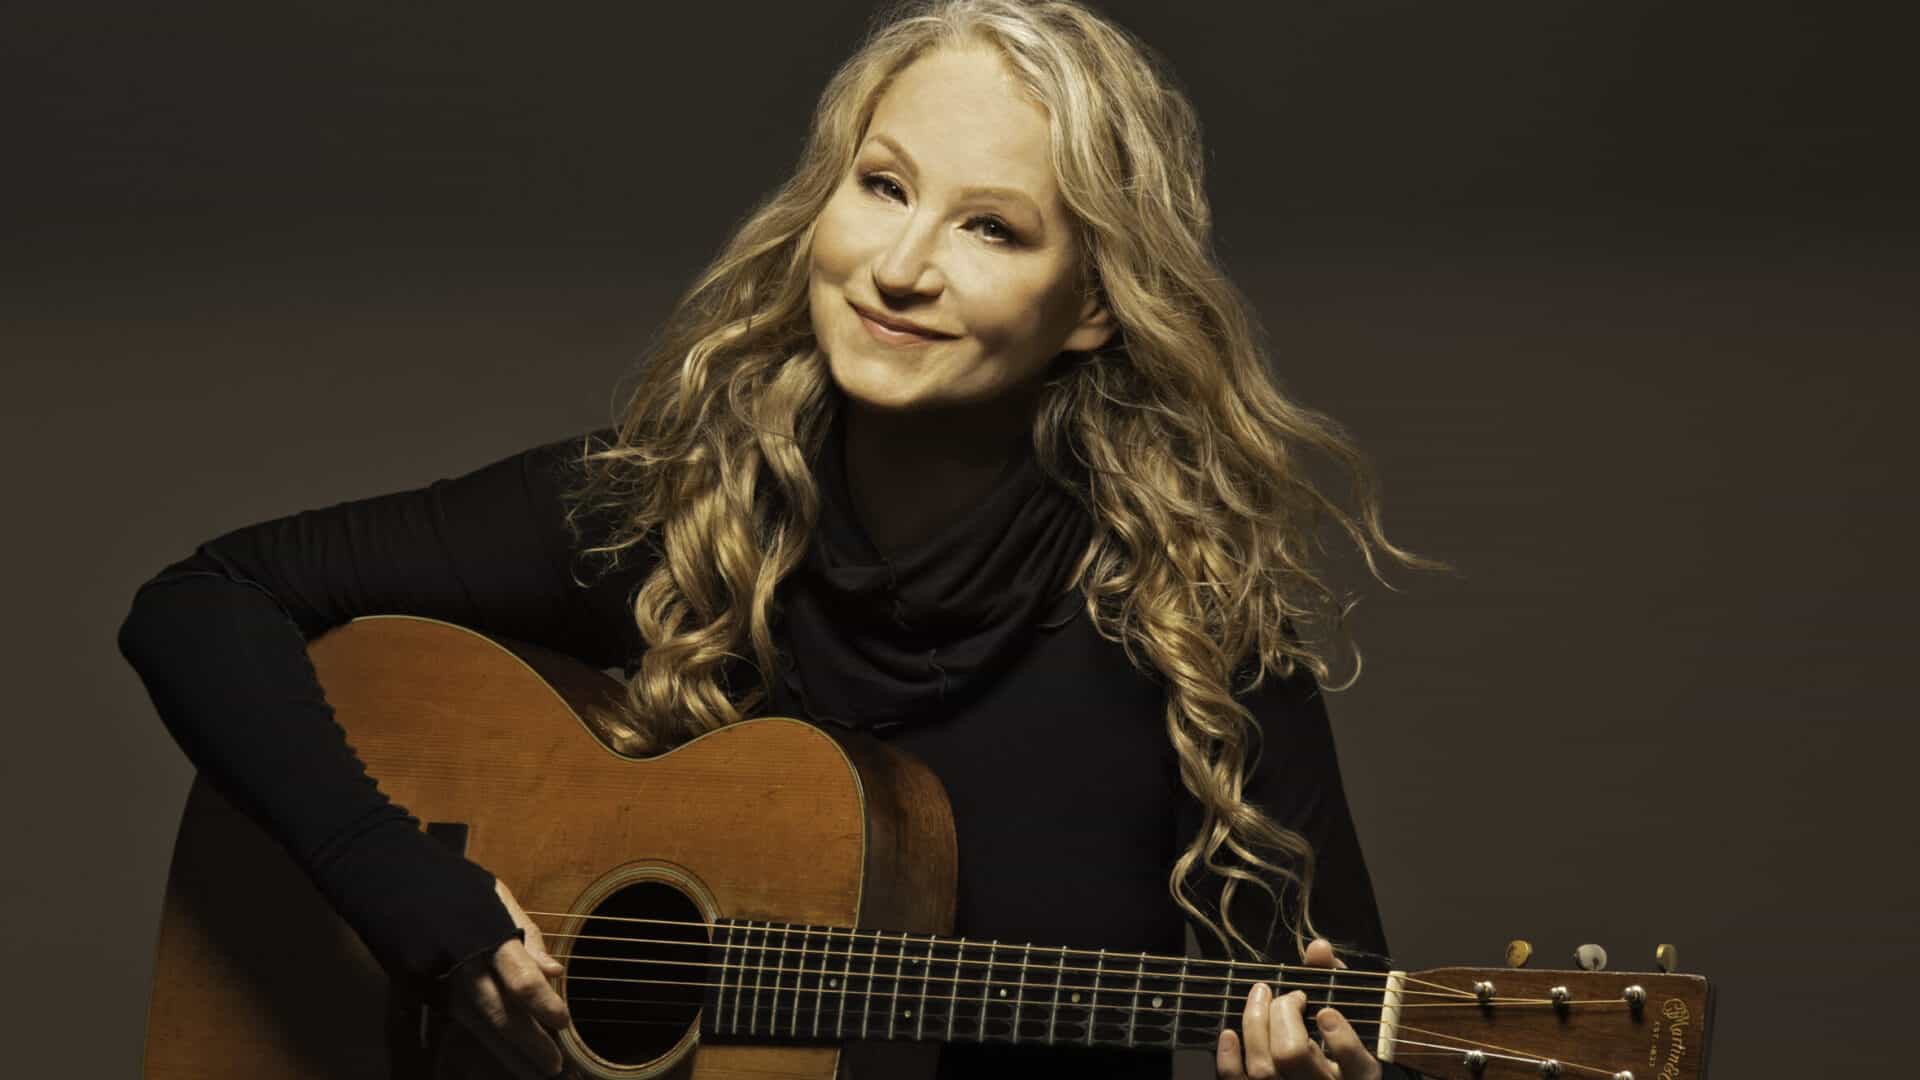 Joan Osborne performs live at the Mahaiwe in a blend of pop rock, soul, R&B, blues, roots rock, gospel, funk and country.